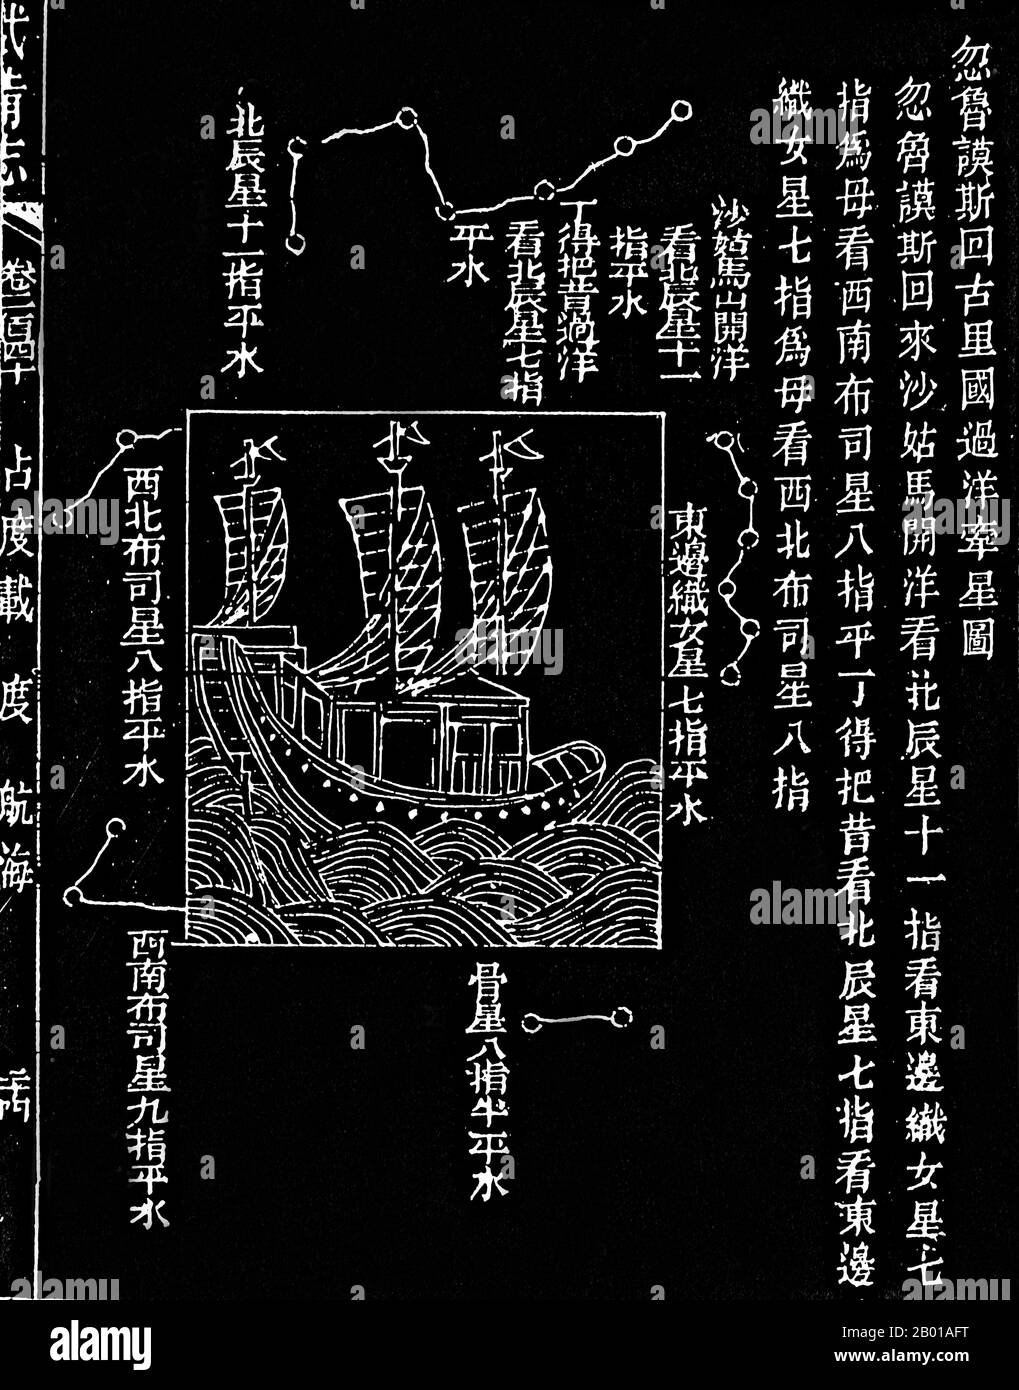 China: One of a set of stellar diagrams showing the guiding stars enroute form Hormuz to Calicut. From the Mao Kun map in the Ming Dynasty military treatise 'Wubei Zhi', depicting Zheng He's maritime expeditions to the Indian Ocean (1405-1433), 1628.  Between 1405 and 1433, the Ming government sponsored a series of seven naval expeditions. The Yongle emperor designed them to establish a Chinese presence, impose imperial control over trade, impress foreign peoples in the Indian Ocean basin and extend the empire's tributary system. Zheng He was placed as the admiral in control of the huge fleet. Stock Photo